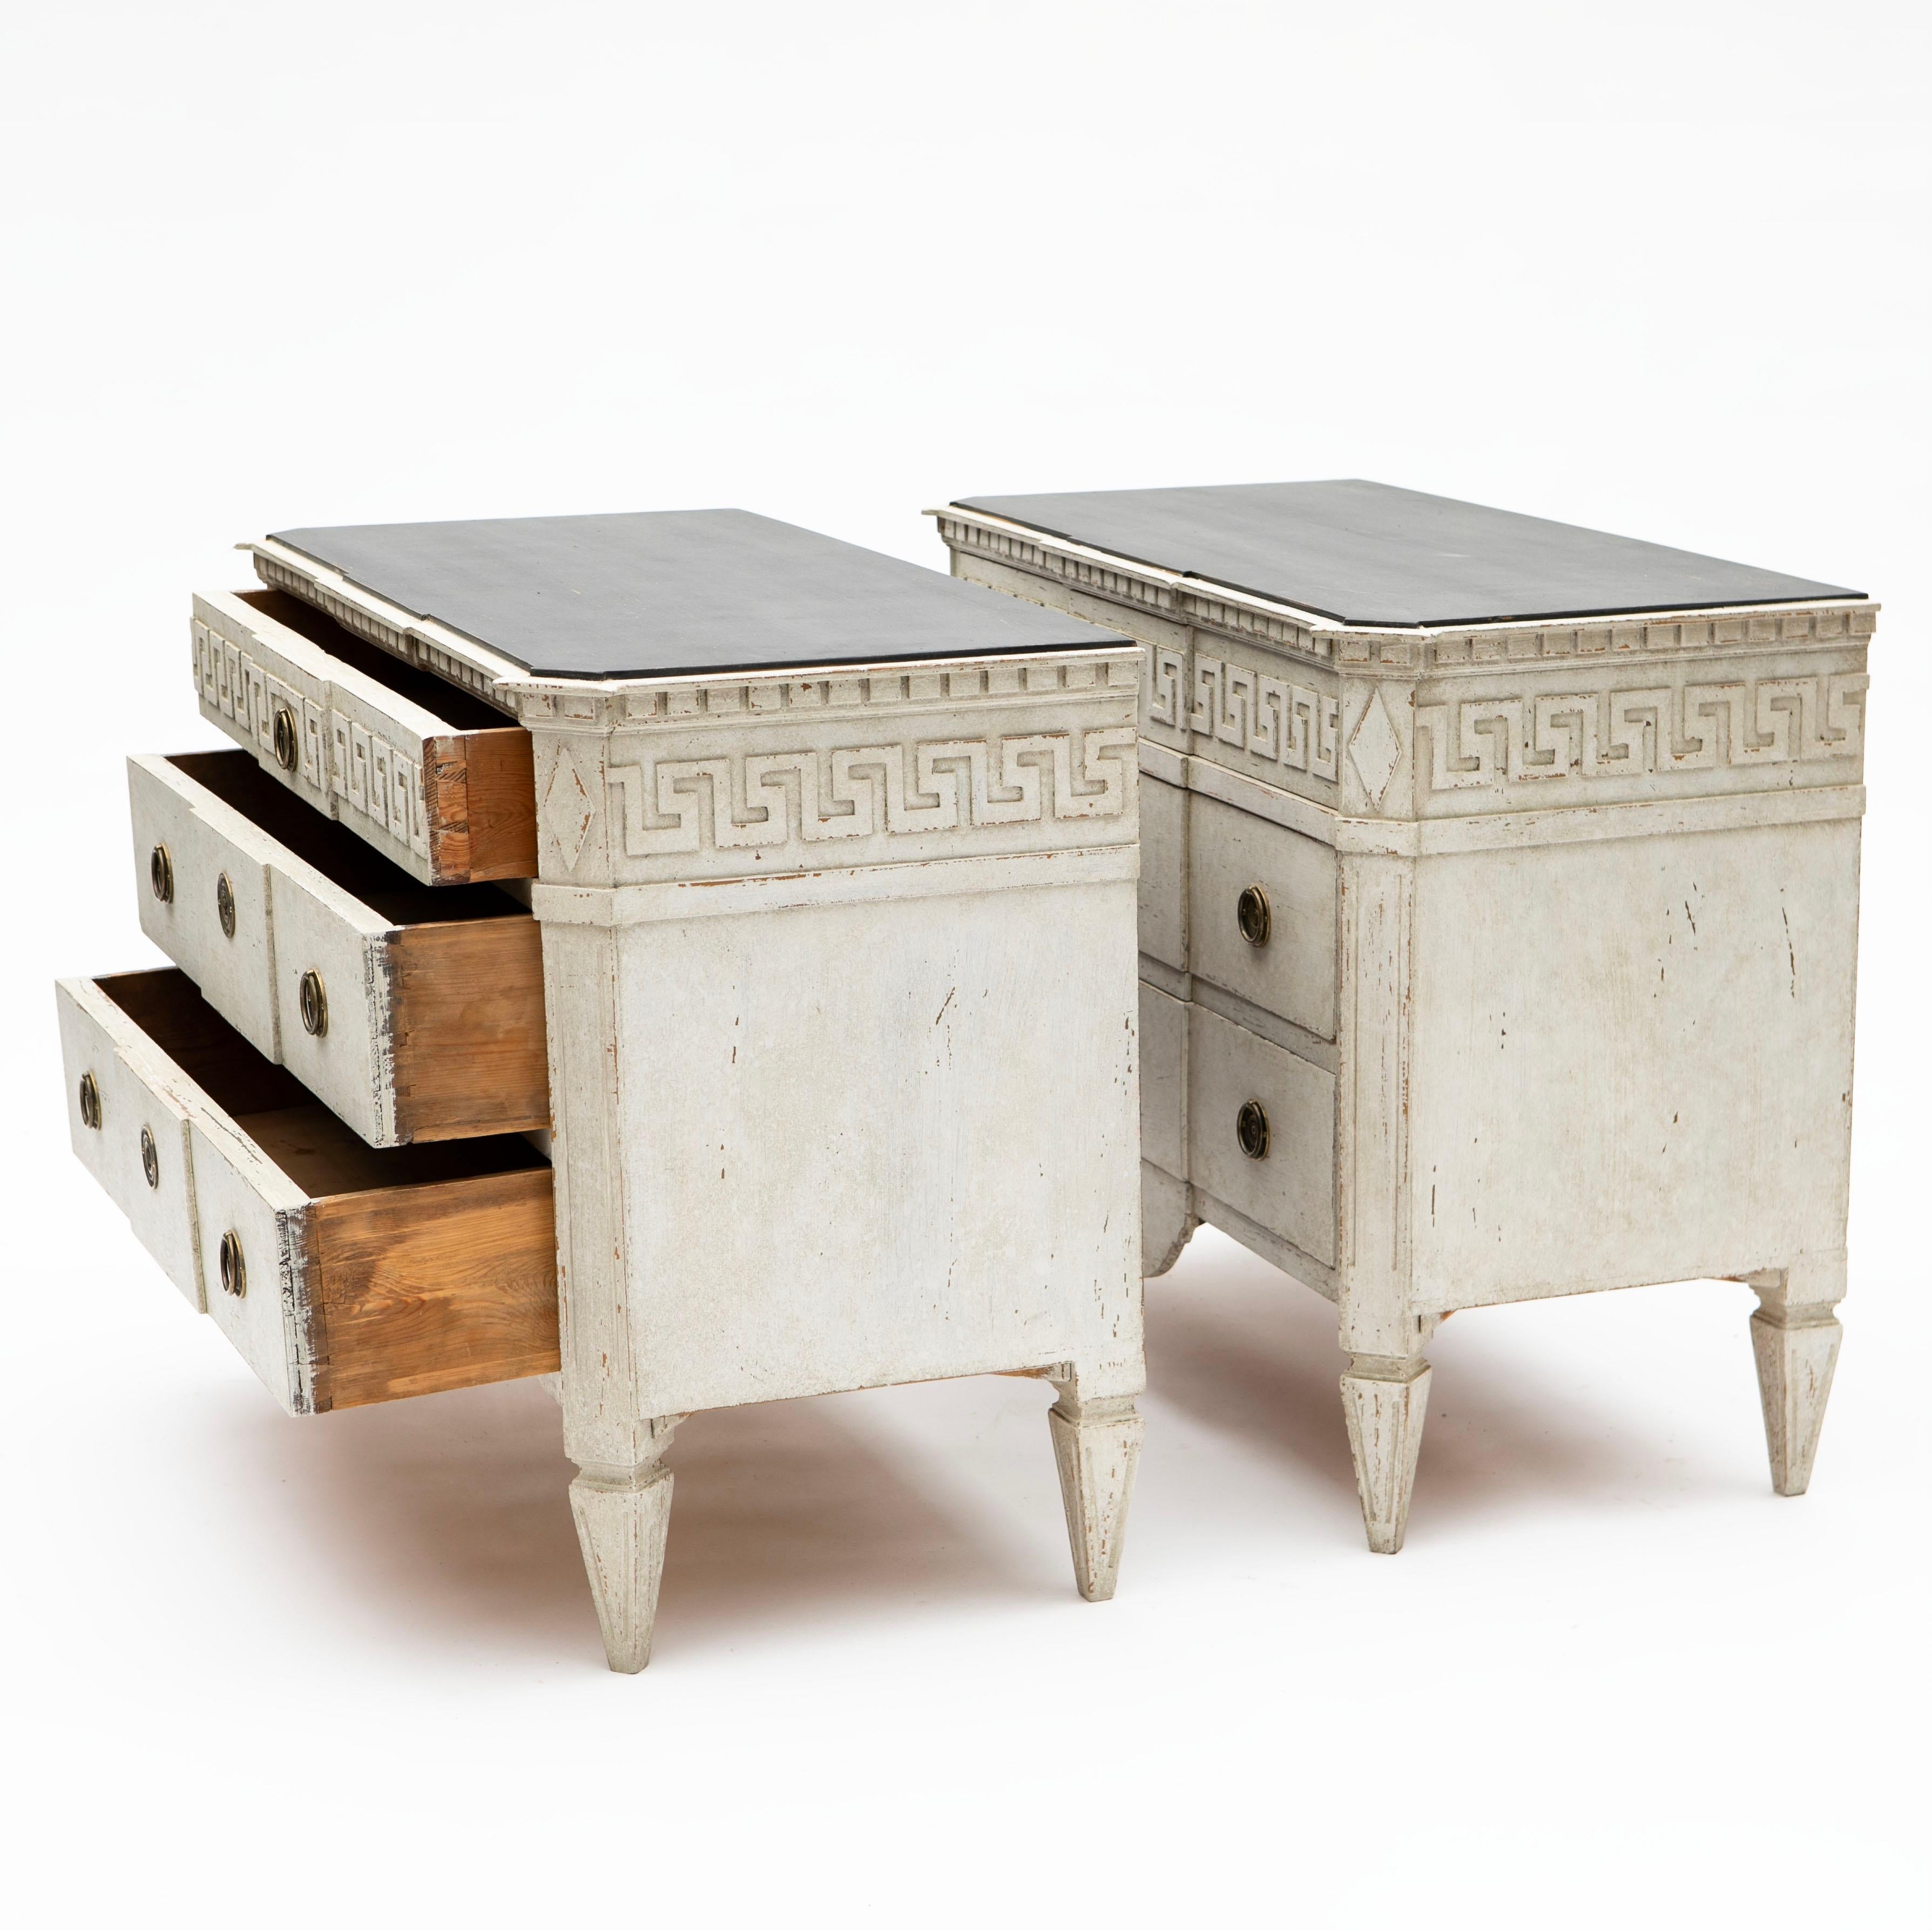 A pair of antique Swedish Gustavian style light-grey painted chest of three drawers, dating from the 19th century.
Each chest features a black painted rectangular top with canted corners in the front, sitting above a delicate meander décor molding